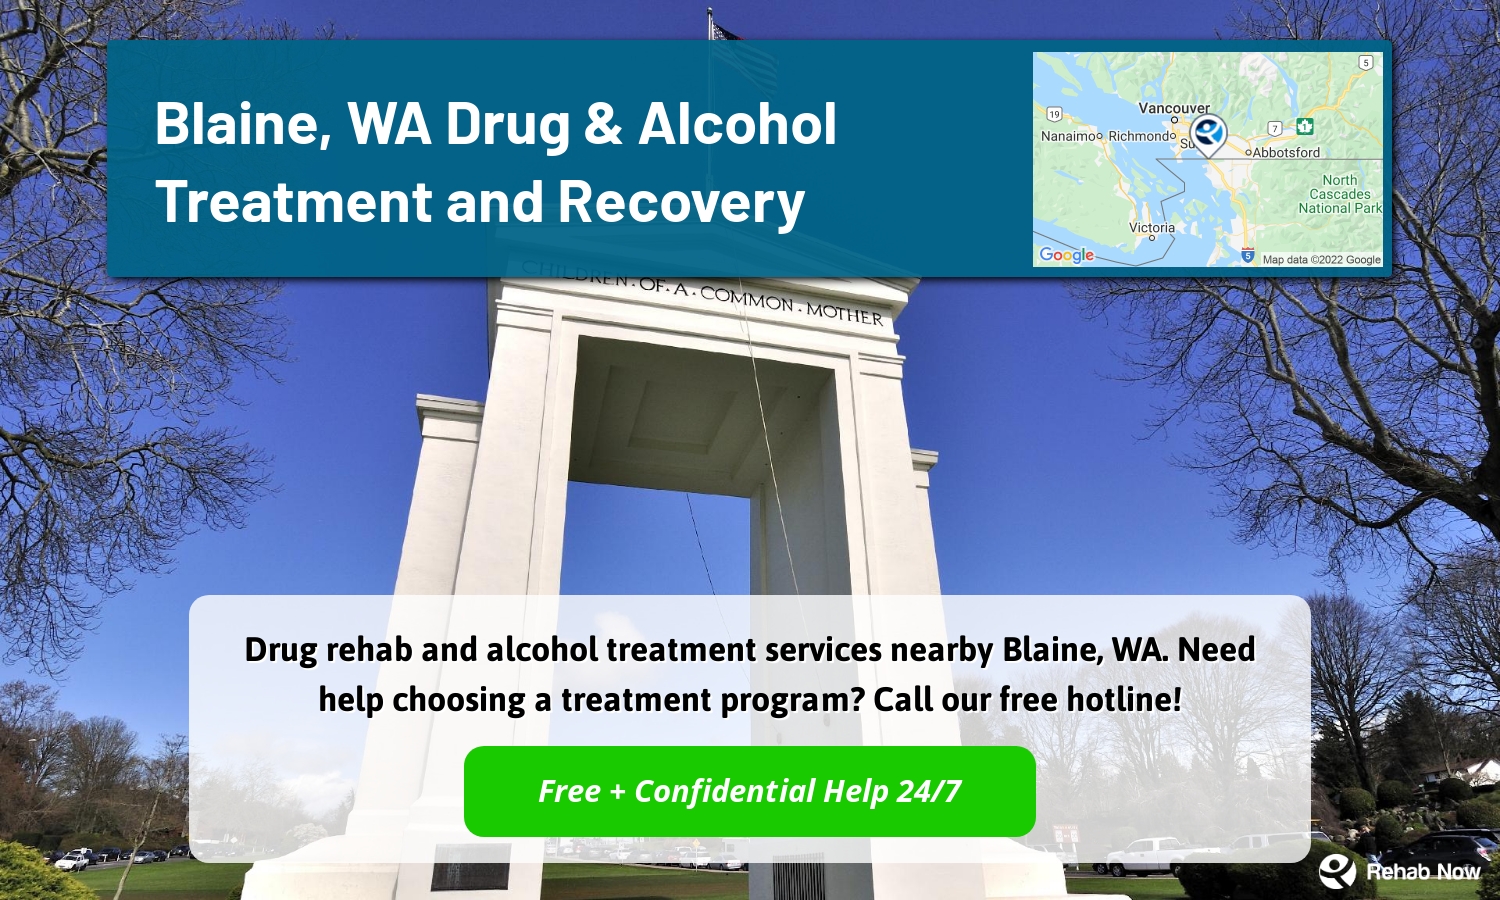 Drug rehab and alcohol treatment services nearby Blaine, WA. Need help choosing a treatment program? Call our free hotline!